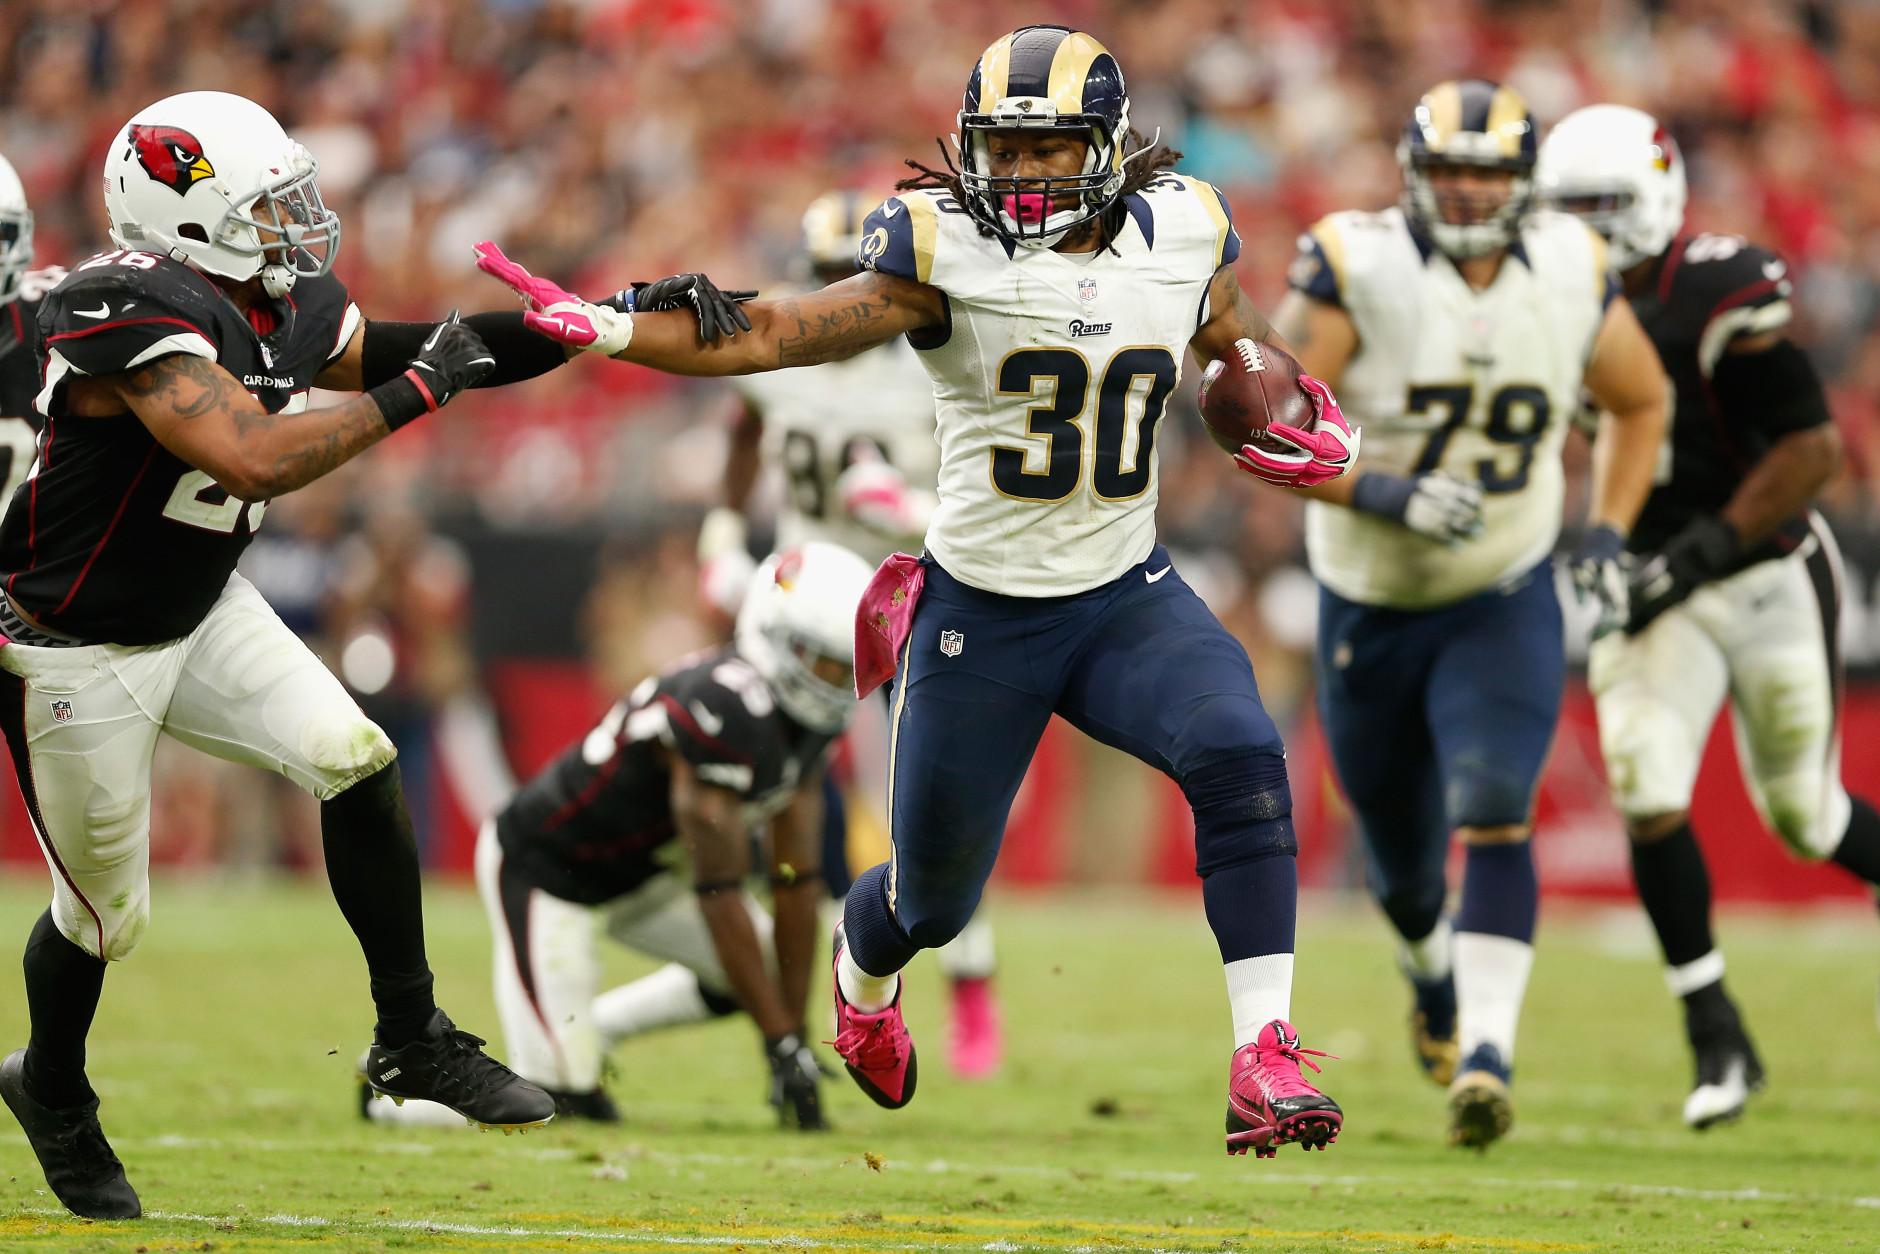 GLENDALE, AZ - OCTOBER 04: Running back Todd Gurley #30 of the St. Louis Rams runs past free safety Rashad Johnson #26 of the Arizona Cardinals during the second half of the NFL game at the University of Phoenix Stadium on October 4, 2015 in Glendale, Arizona.  (Photo by Christian Petersen/Getty Images)